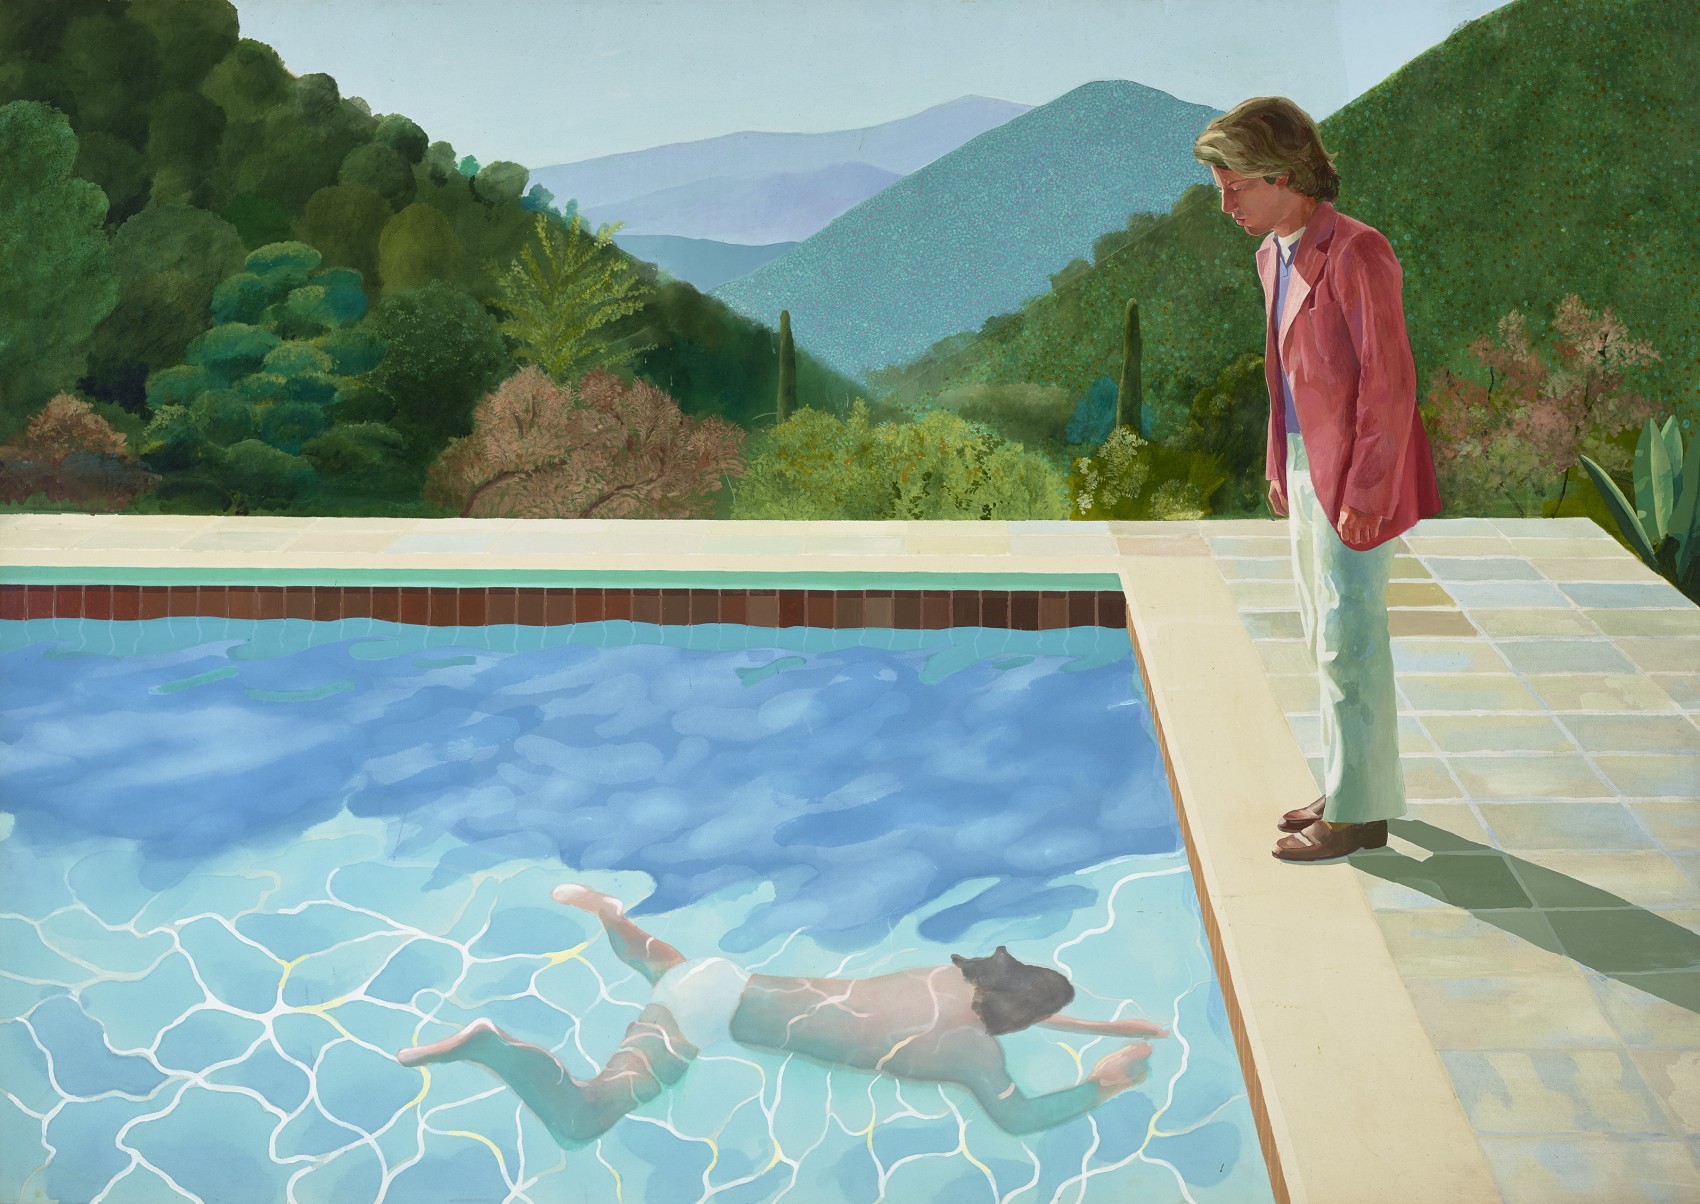 "PORTRAIT OF AN ARTIST (POOL WITH TWO FIGURES)" 1972
ACRYLIC ON CANVAS
84 X 120"
© DAVID HOCKNEY
PHOTO CREDIT: ART GALLERY OF NEW SOUTH WALES/JENNI CARTER